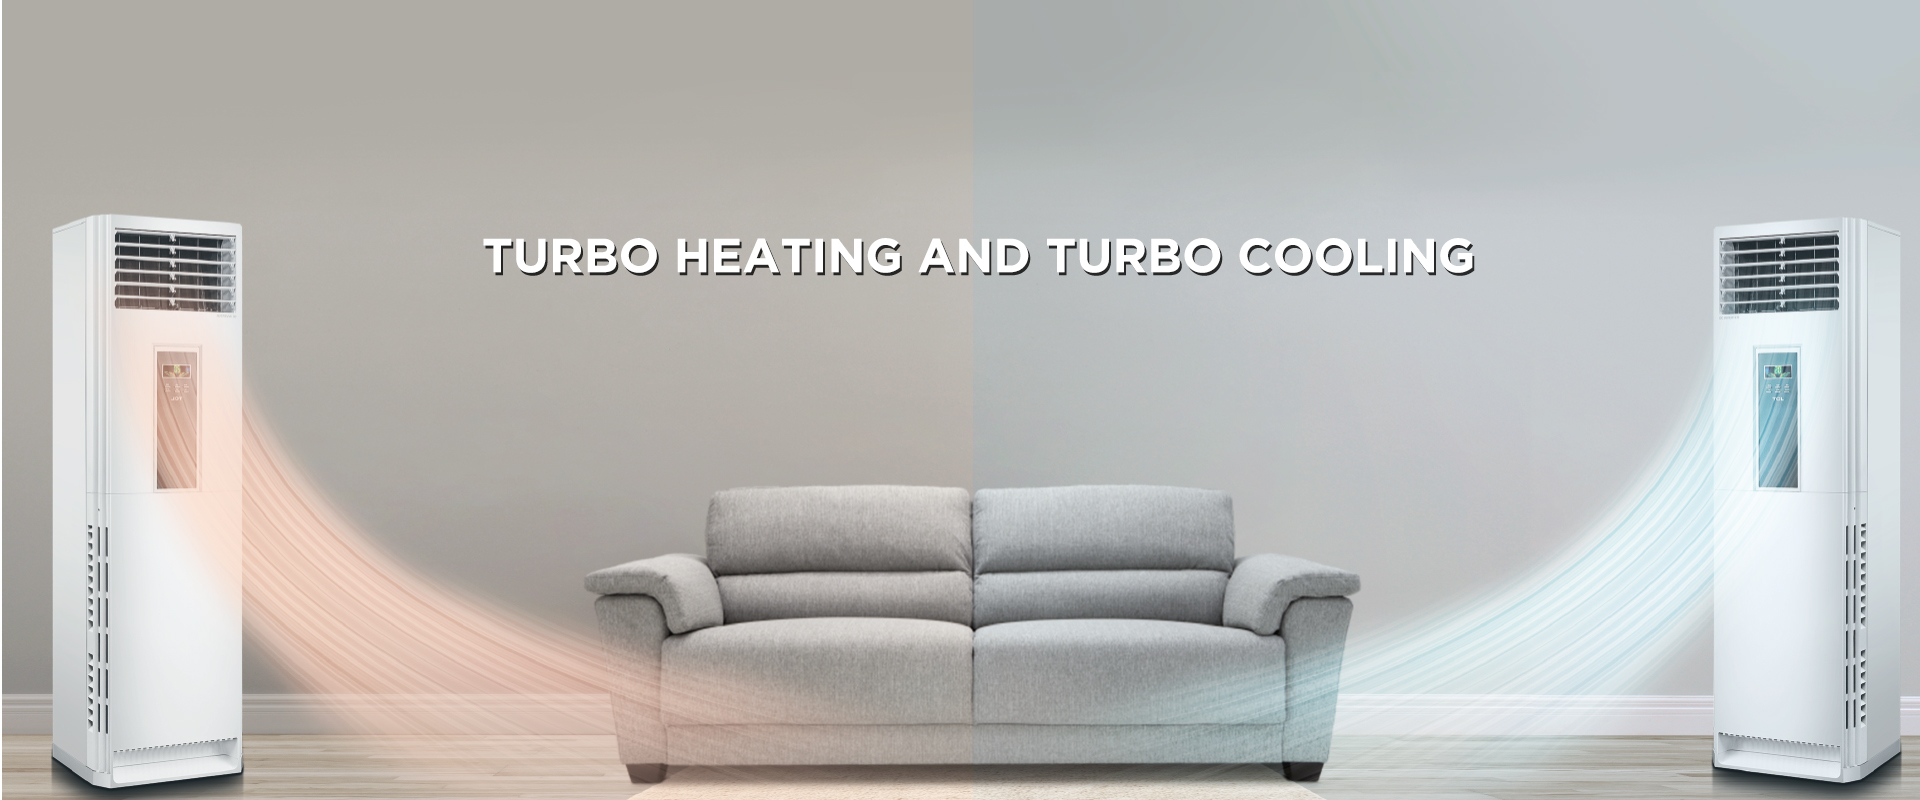 turbo heating and turbo cooling